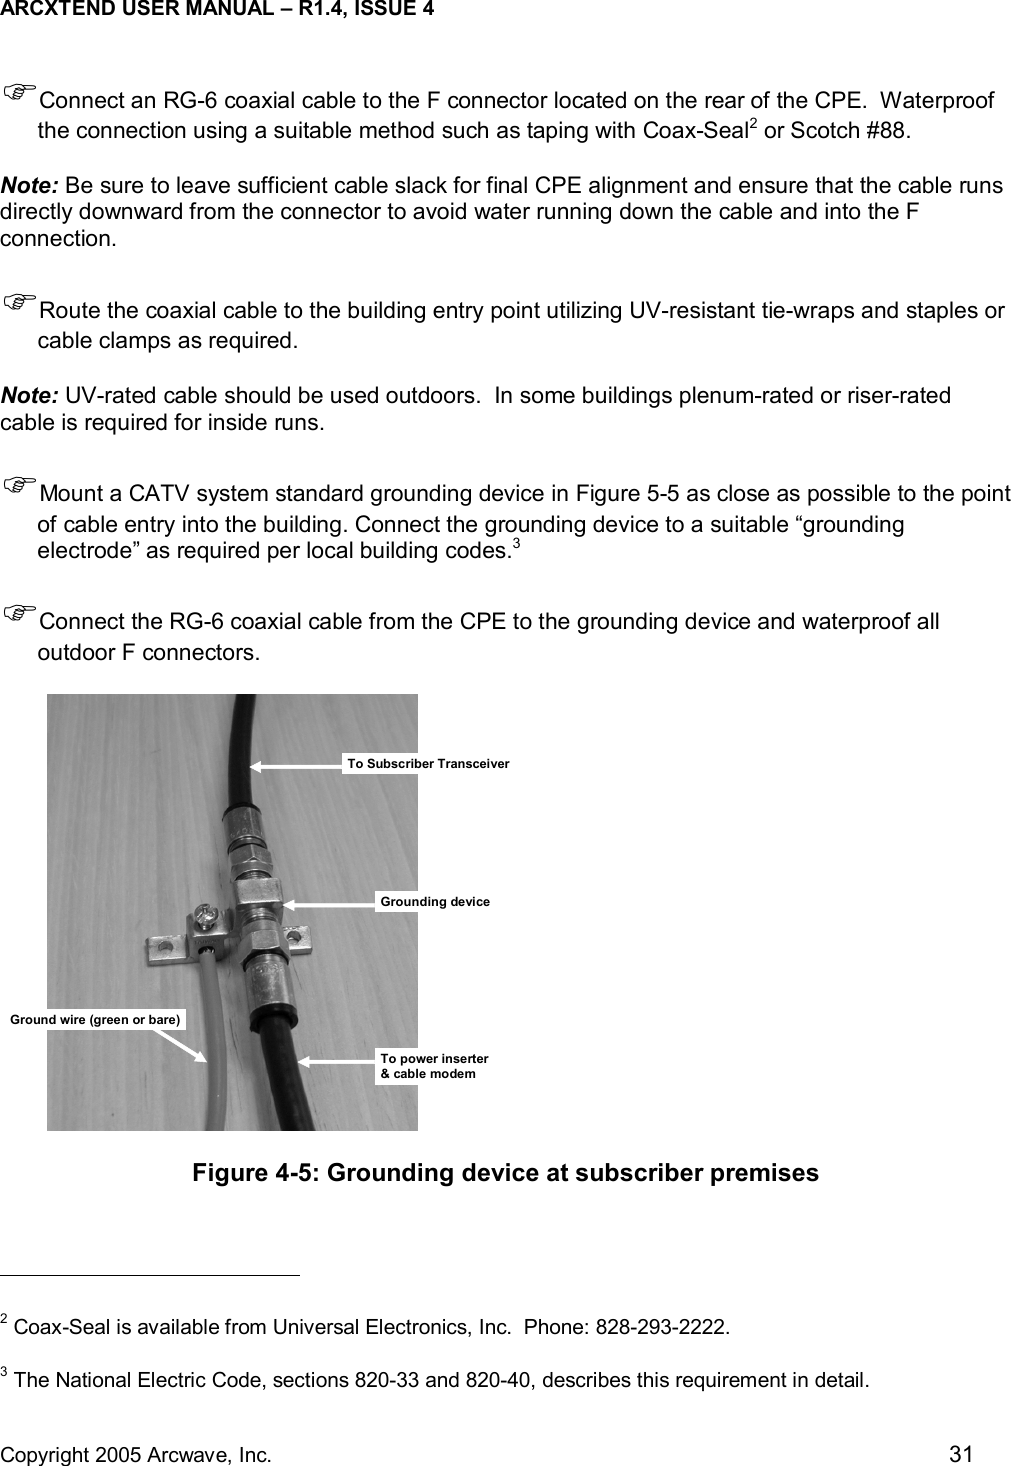 ARCXTEND USER MANUAL – R1.4, ISSUE 4  Copyright 2005 Arcwave, Inc.    31 )Connect an RG-6 coaxial cable to the F connector located on the rear of the CPE.  Waterproof the connection using a suitable method such as taping with Coax-Seal2 or Scotch #88.   Note: Be sure to leave sufficient cable slack for final CPE alignment and ensure that the cable runs directly downward from the connector to avoid water running down the cable and into the F connection.  )Route the coaxial cable to the building entry point utilizing UV-resistant tie-wraps and staples or cable clamps as required.   Note: UV-rated cable should be used outdoors.  In some buildings plenum-rated or riser-rated cable is required for inside runs. )Mount a CATV system standard grounding device in Figure 5-5 as close as possible to the point of cable entry into the building. Connect the grounding device to a suitable “grounding electrode” as required per local building codes.3  )Connect the RG-6 coaxial cable from the CPE to the grounding device and waterproof all outdoor F connectors. To Subscriber TransceiverGrounding deviceGround wire (green or bare)To power inserter&amp; cable modem Figure 4-5: Grounding device at subscriber premises                                                  2 Coax-Seal is available from Universal Electronics, Inc.  Phone: 828-293-2222. 3 The National Electric Code, sections 820-33 and 820-40, describes this requirement in detail. 